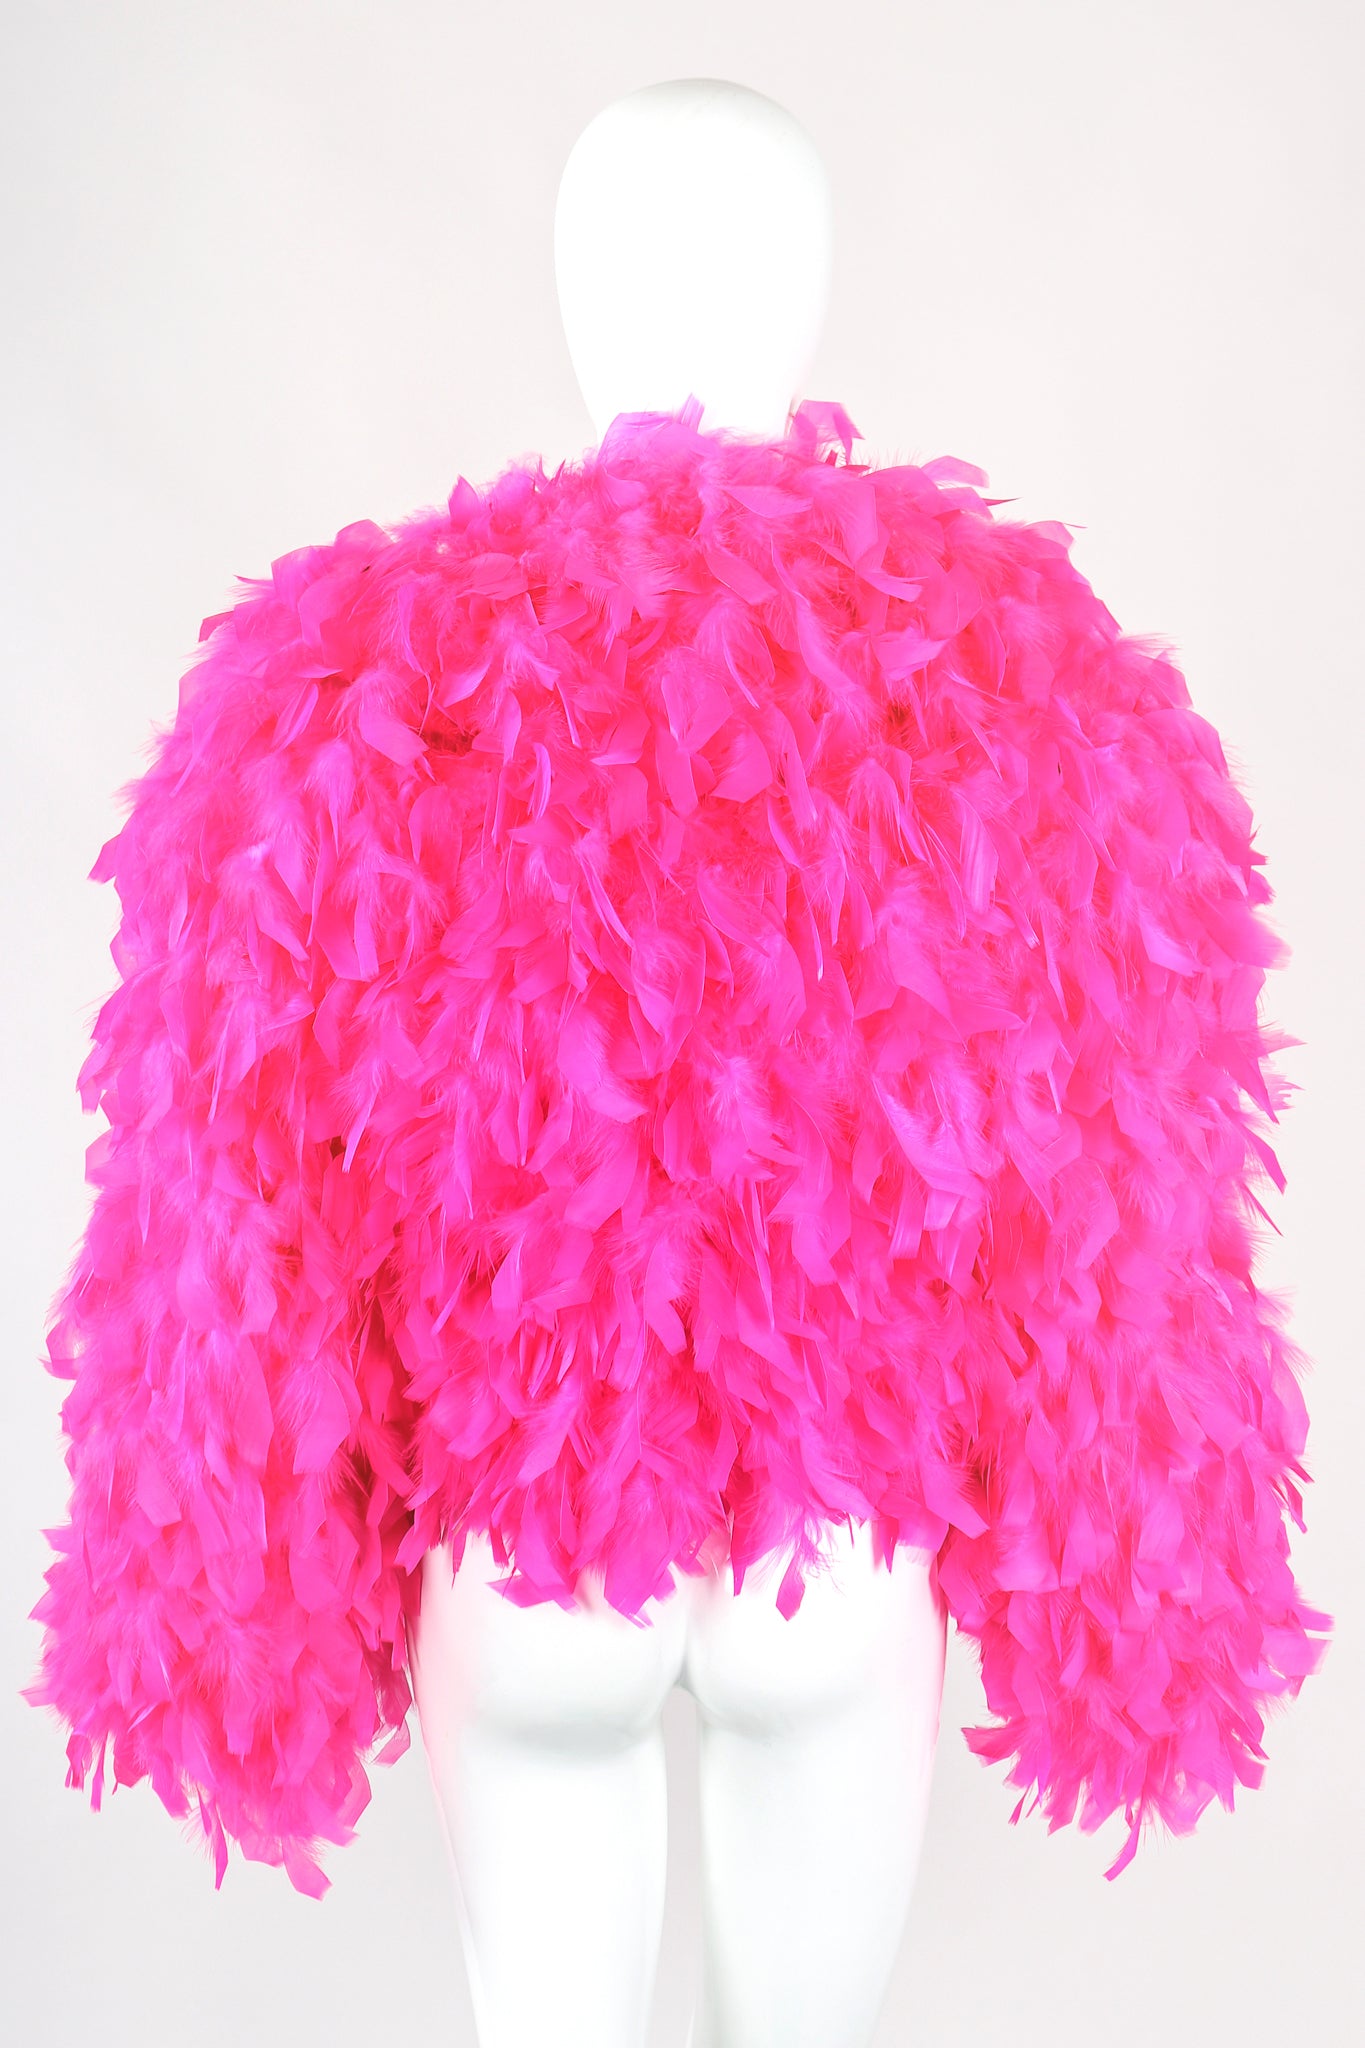 Recess Designer Consignment Vintage Jeanette Kastenberg St. Martin Vivid Hot Pink Feather Chubby Jacket Los Angeles Resale